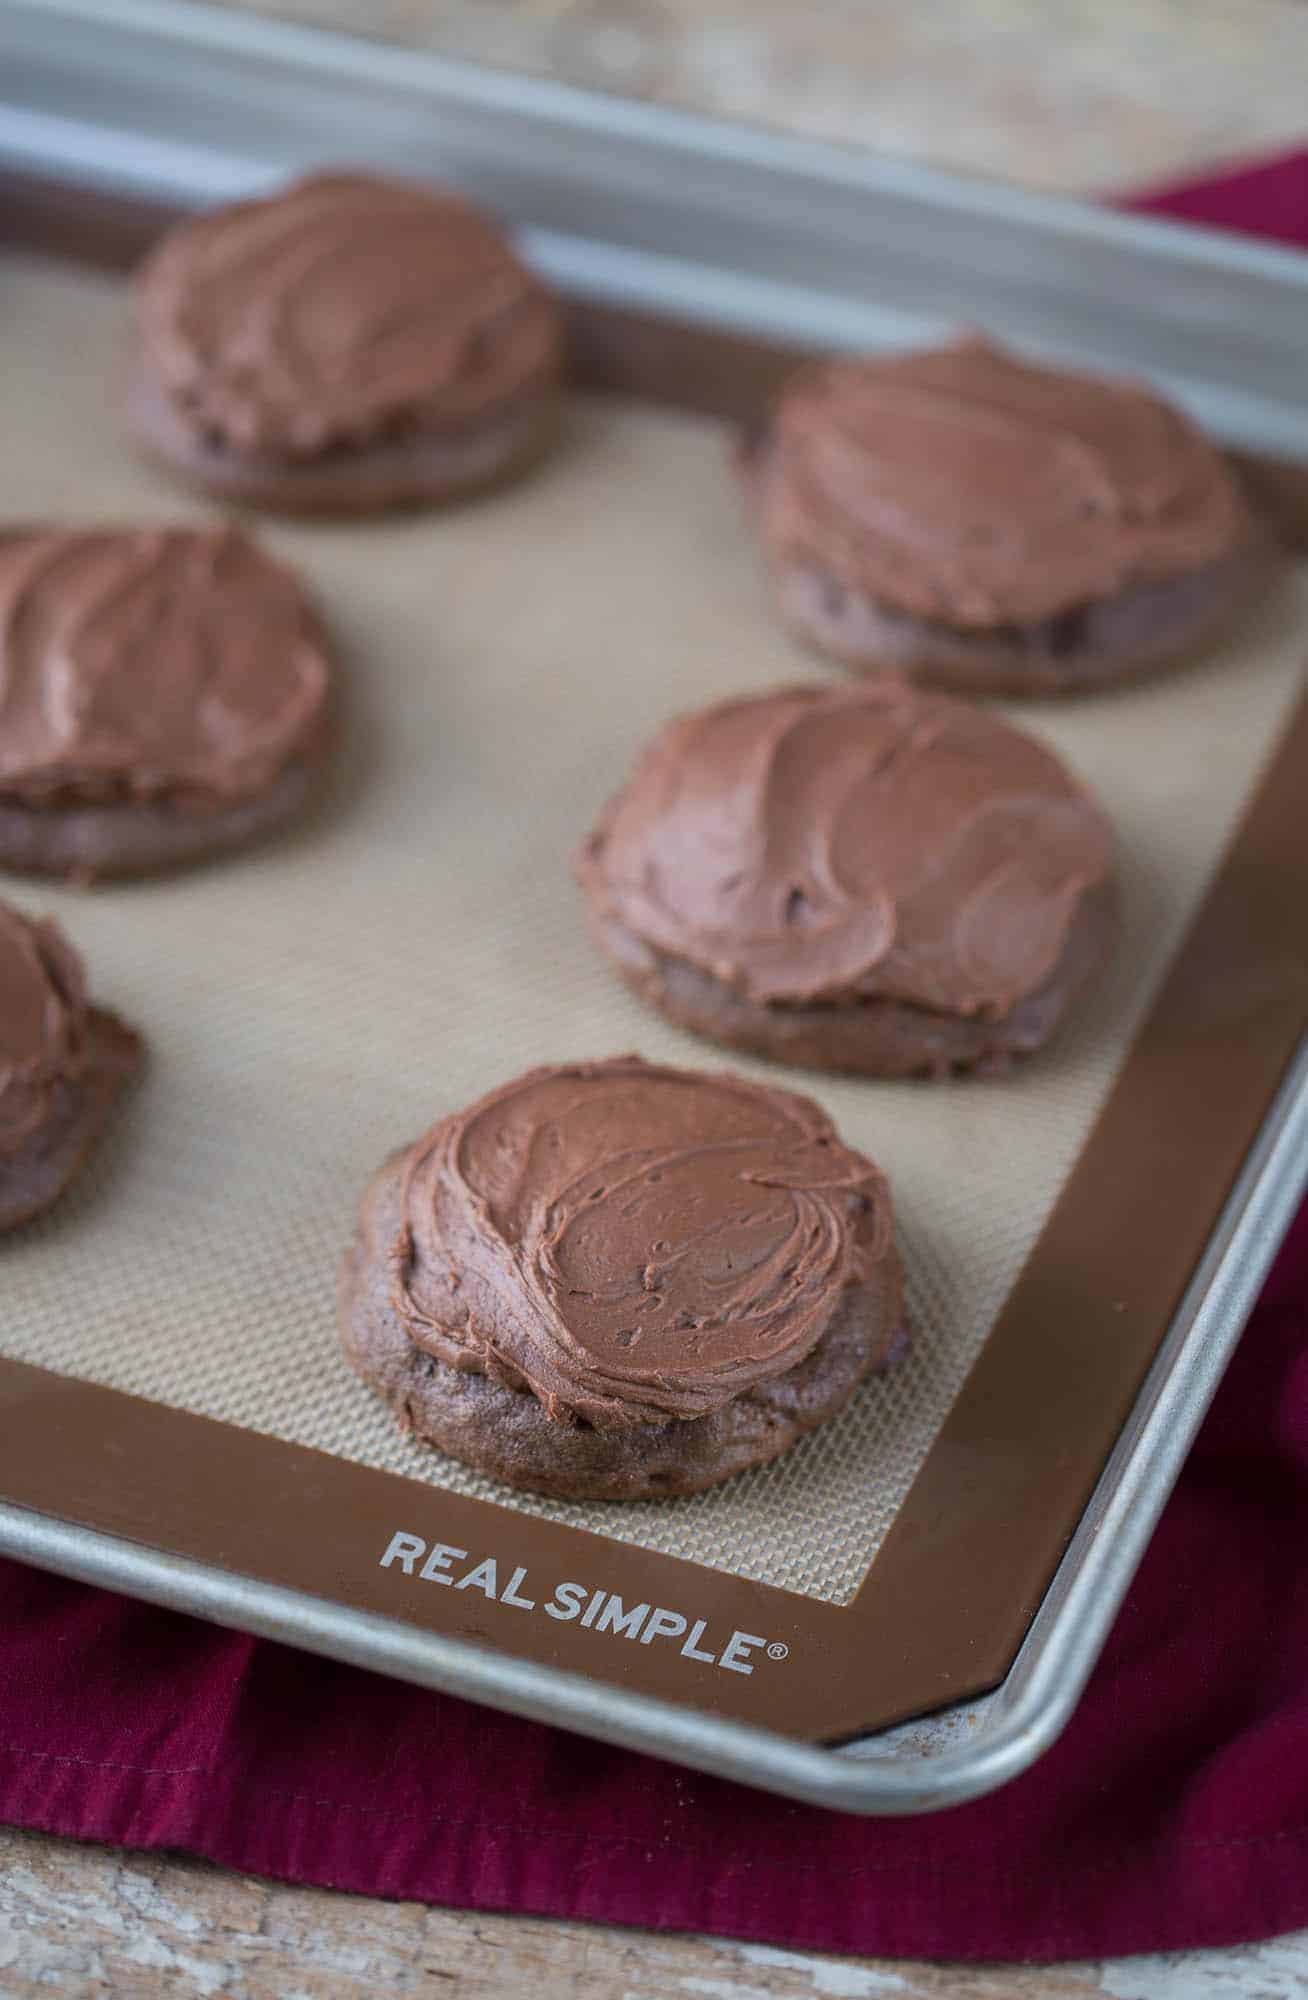 chocolate cookies with chocolate frosting on a sheet pan, sitting on a red towel.